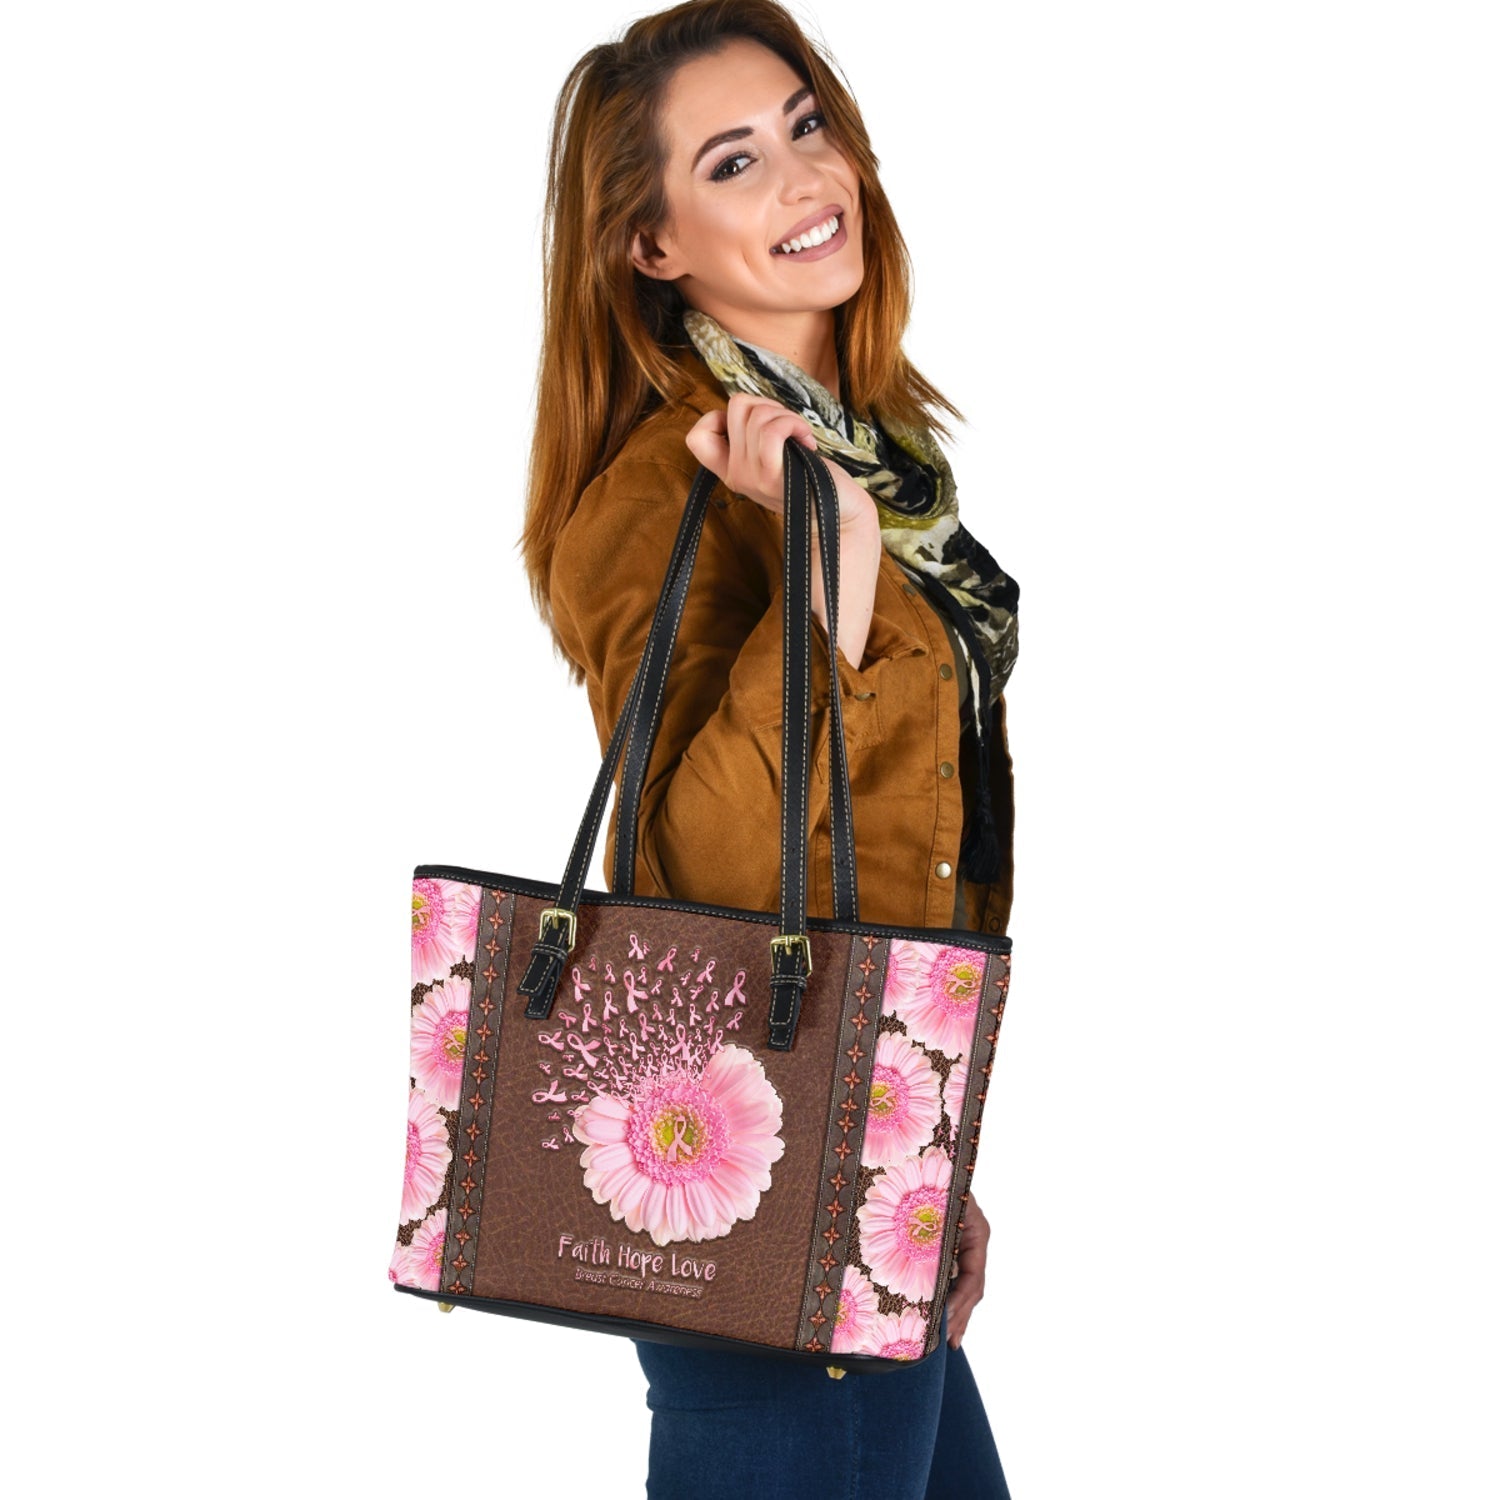 Faith Hope Love Breast Cancer Awareness Breast Cancer Awareness Leather Bag 0622